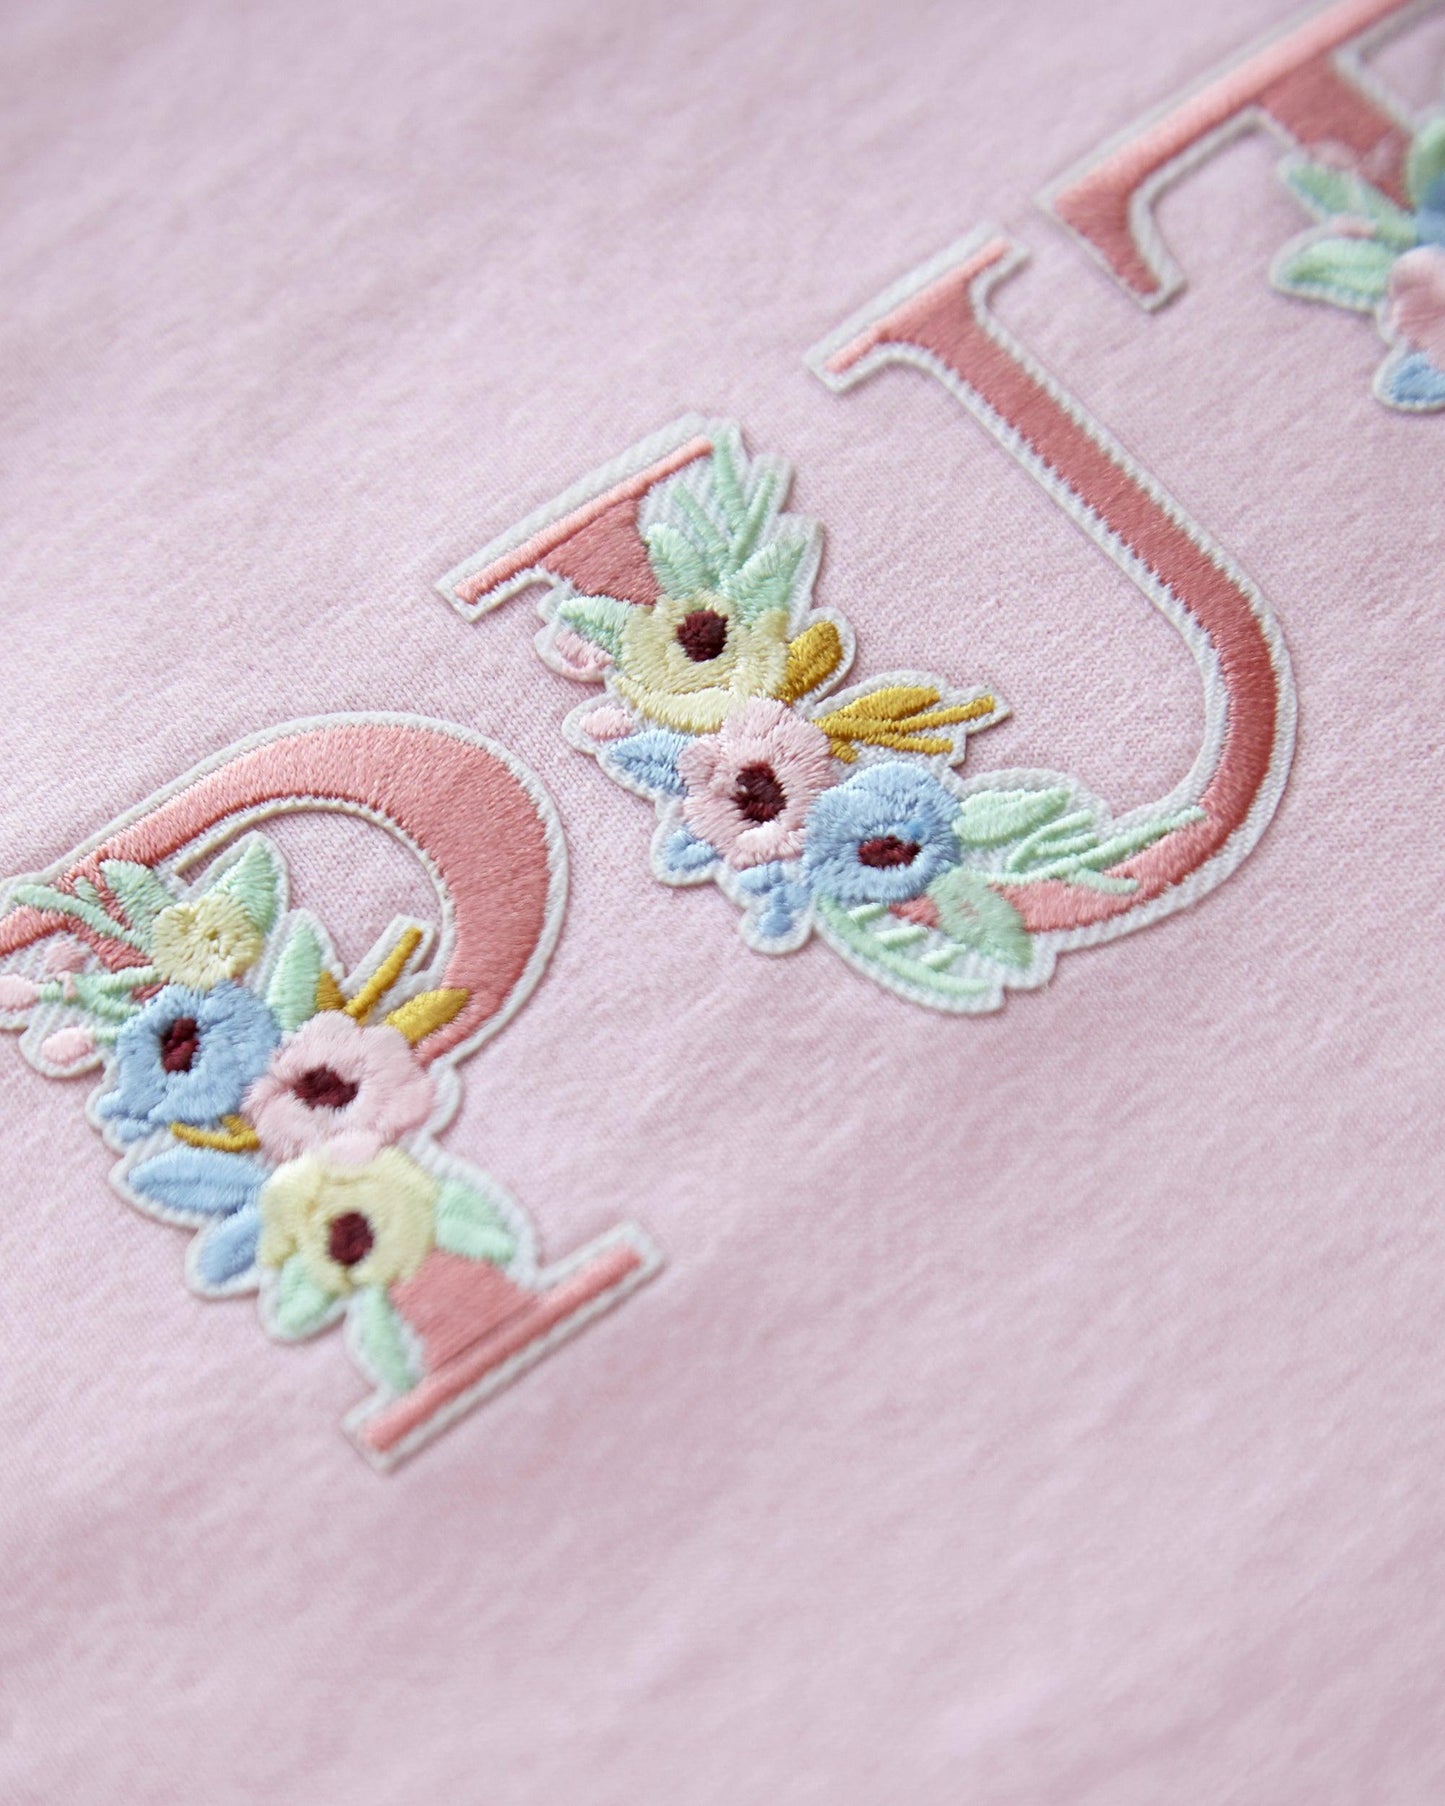 Floral style puta embroidery on pink - sleeveless crop top.